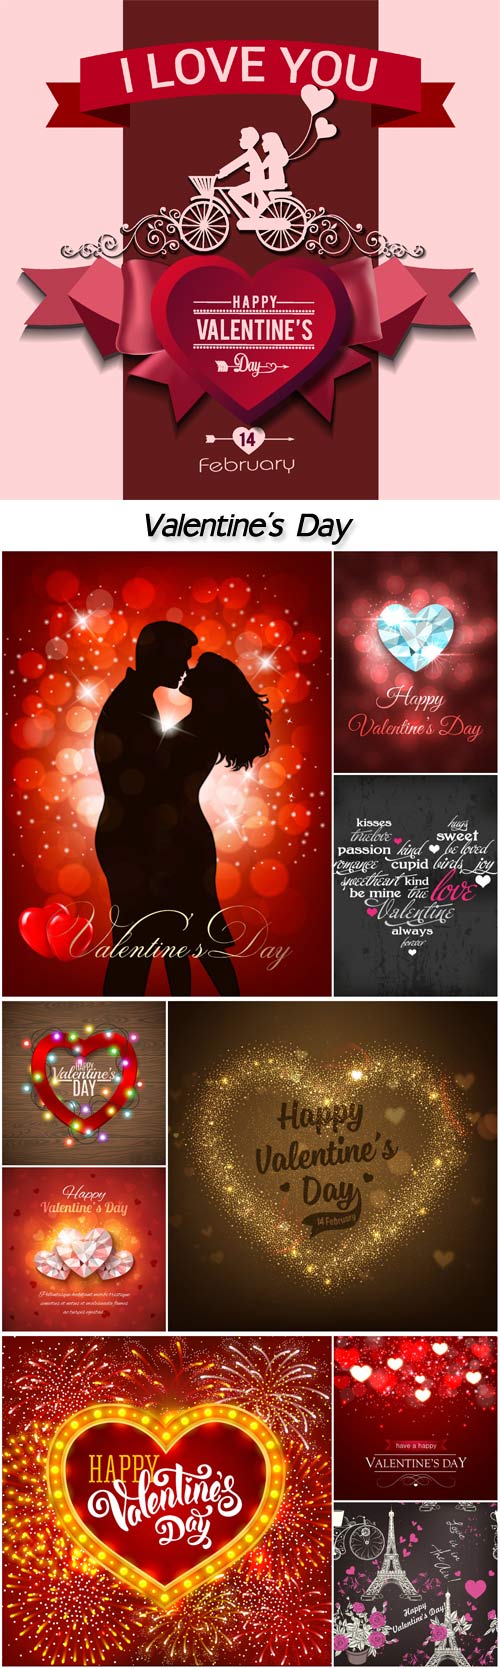 Valentine's Day, romantic backgrounds vector